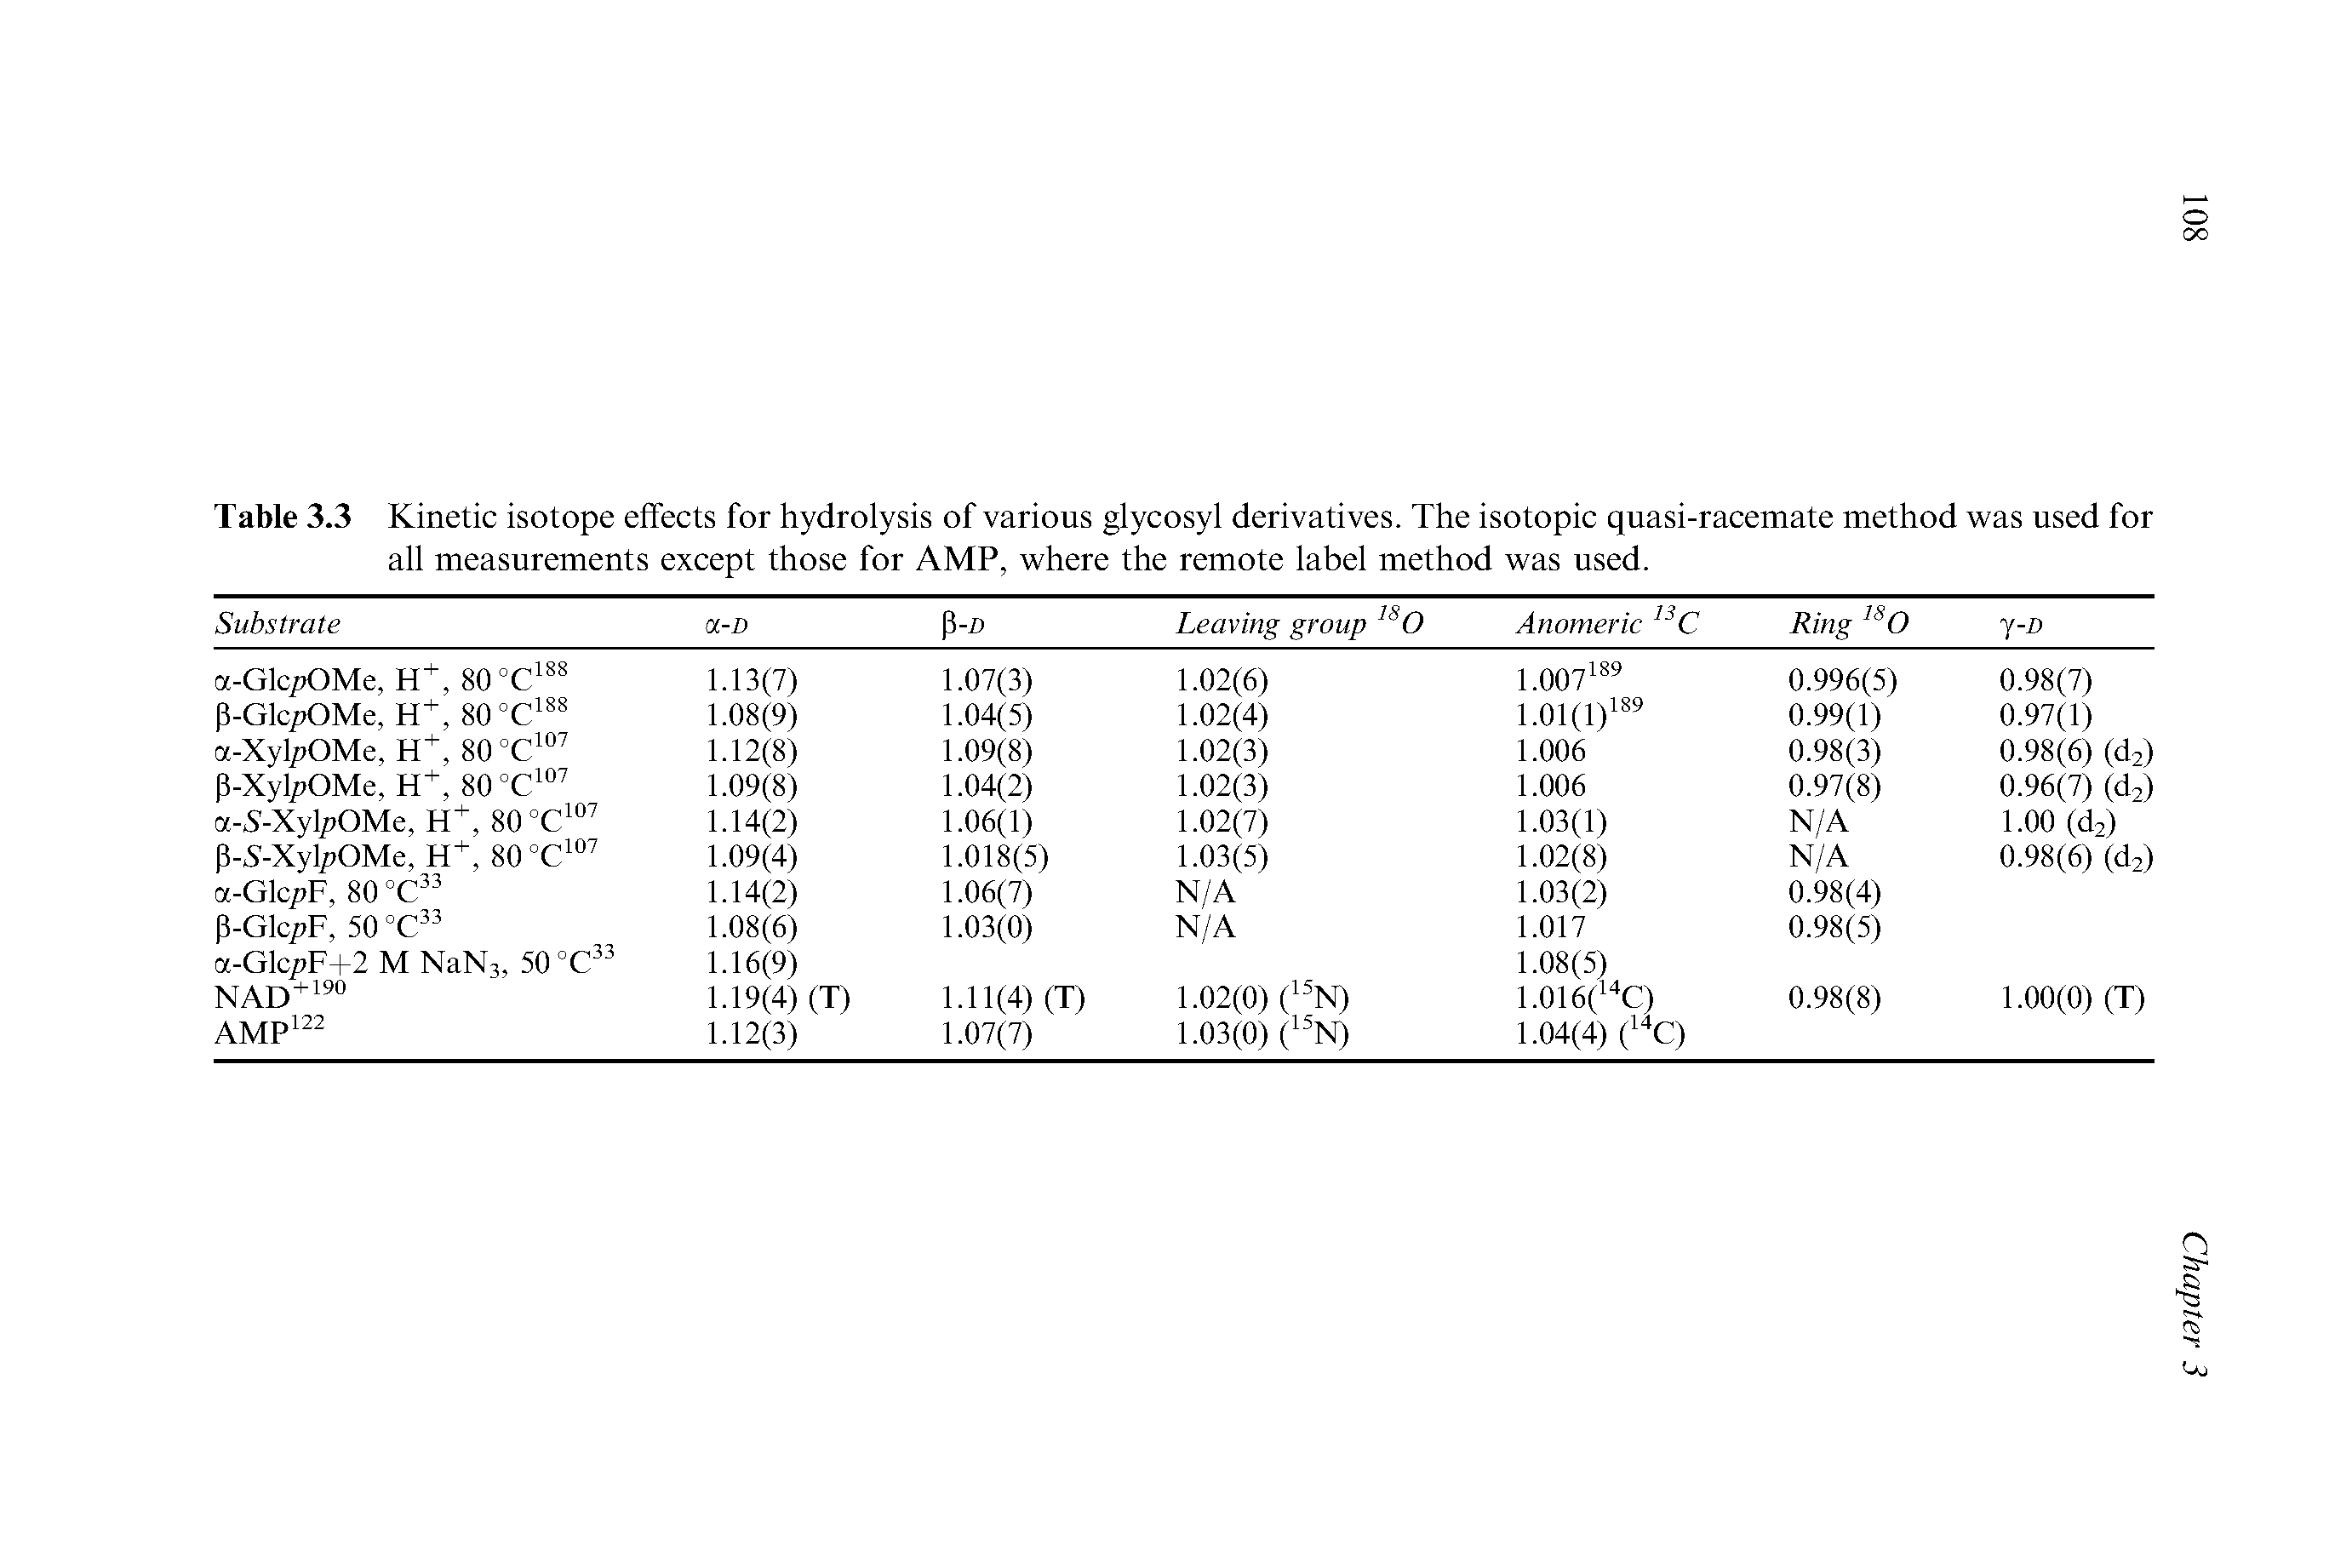 Table 3.3 Kinetic isotope effects for hydrolysis of various glycosyl derivatives. The isotopic quasi-racemate method was used for all measurements except those for AMP, where the remote label method was used.